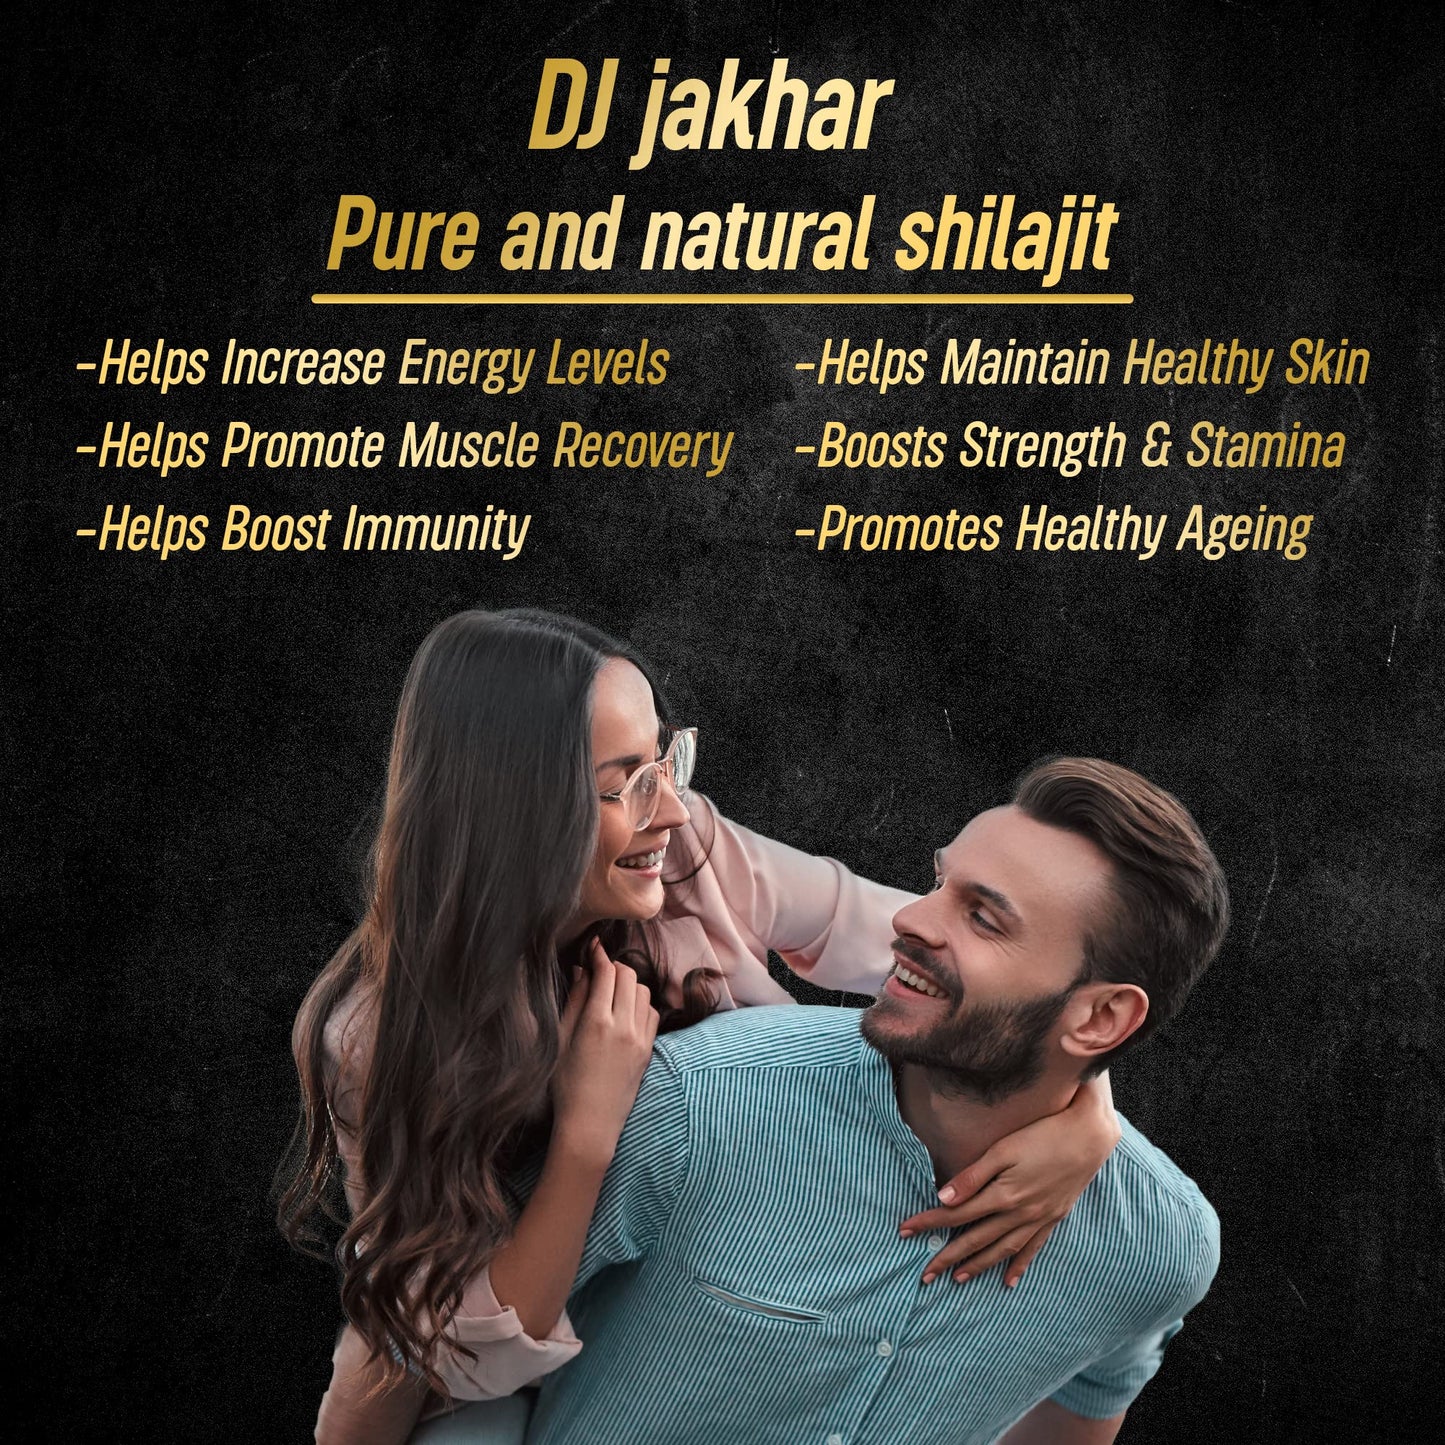 Real Himalyan Natural & Pure Shilajit Resin| For Strength, Energy, Focus and Vitality | Enrich with Minerals - 25 g